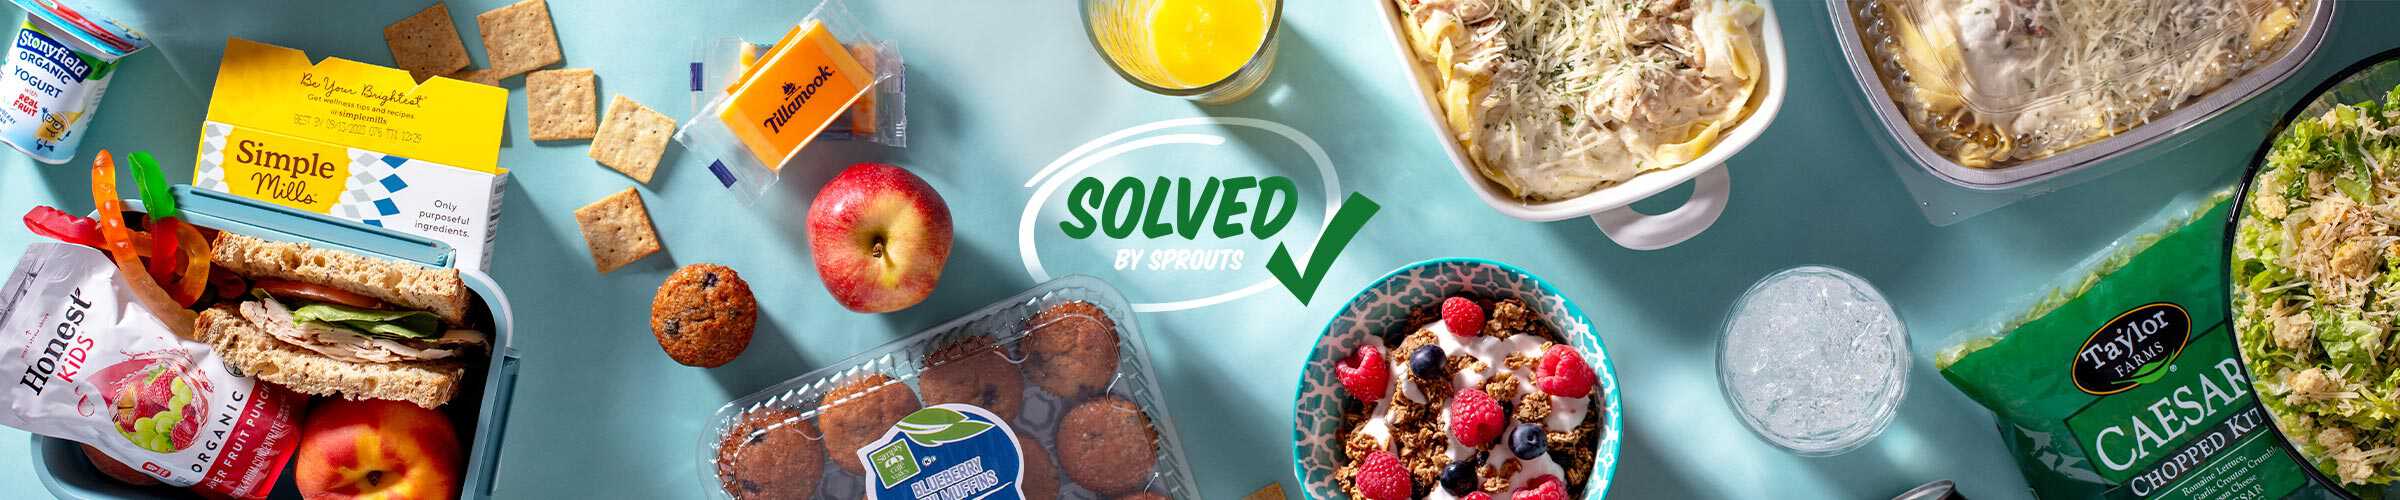 Solved by Sprouts logo alongside kids breakfast and lunch food